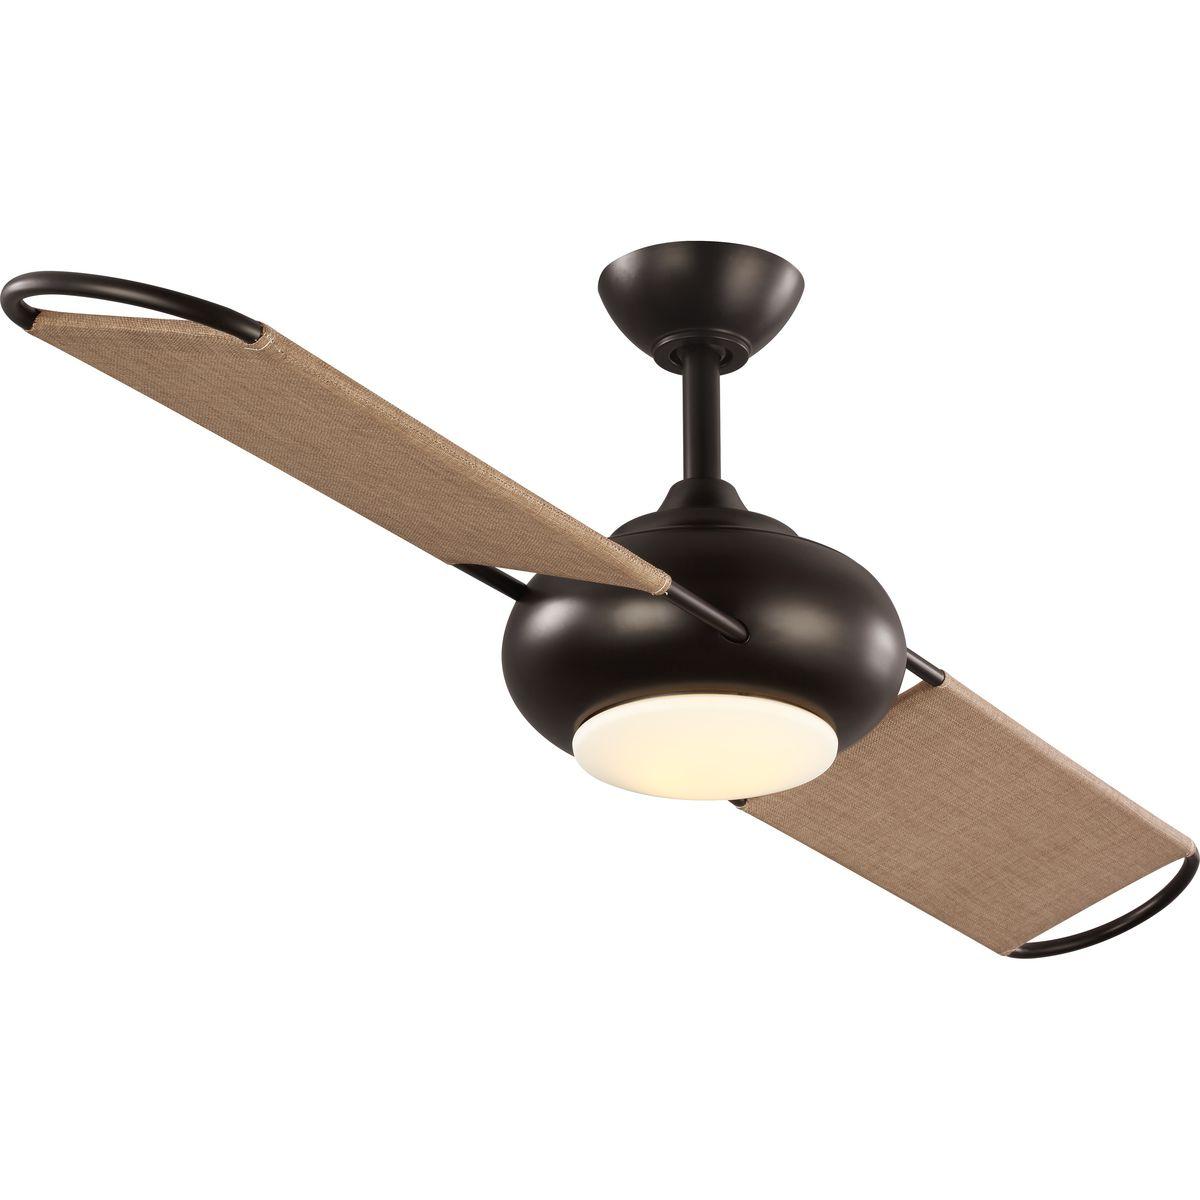 Hubbell P2596-12930K The Edisto 54 inch two-blade outdoor ceiling fan combines a sleek, contemporary style with high-quality performance. A wire frame supports canvas wrapped blades that feature UV inhibitors to protect the fabric from fading in the sunlight. Three fan speeds